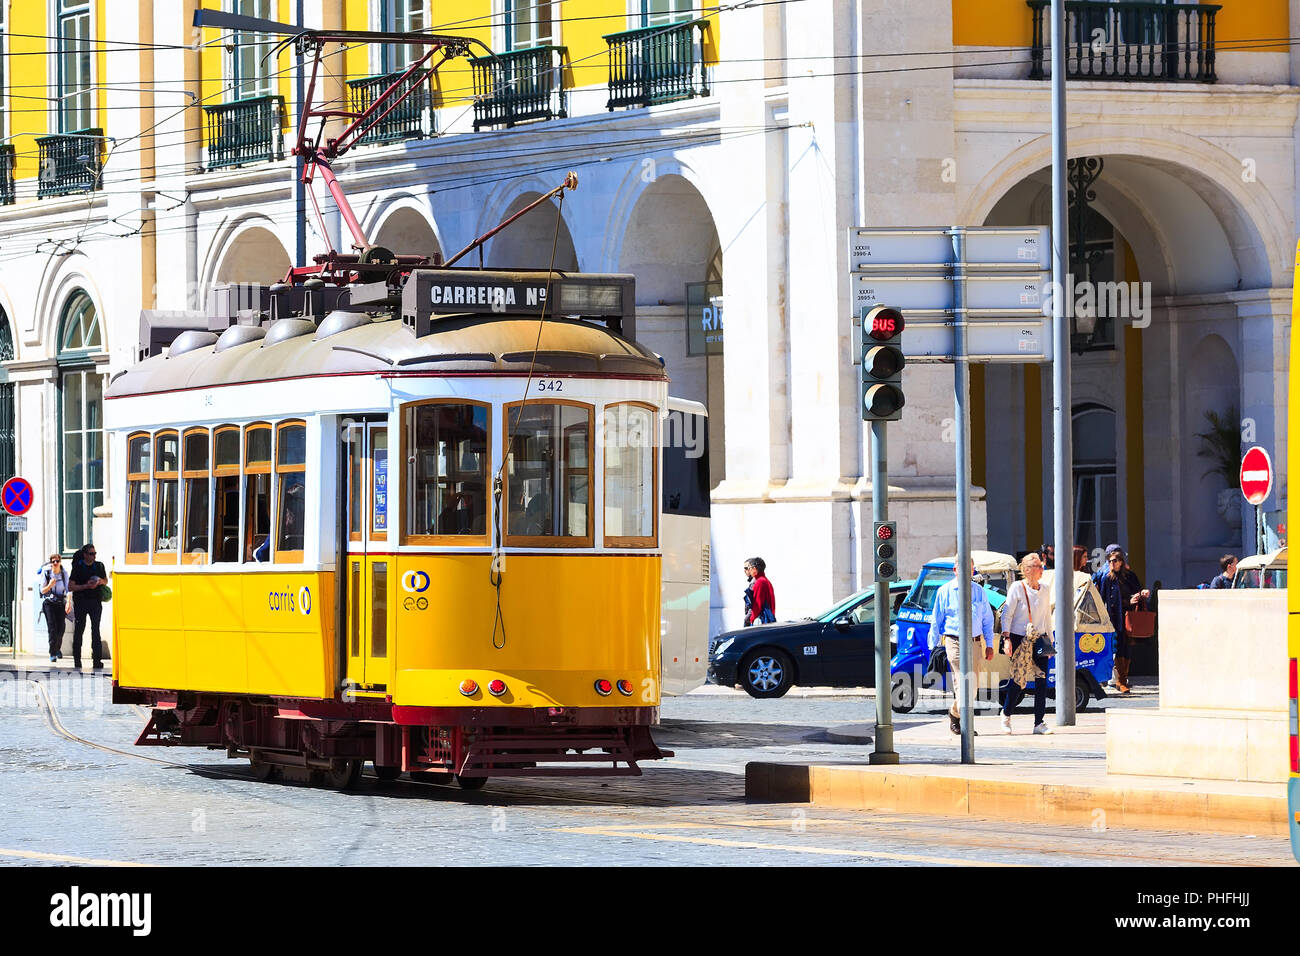 Lisbon, Portugal - March 27, 2018: Yellow tram, symbol of Lisbon and downtown square Stock Photo